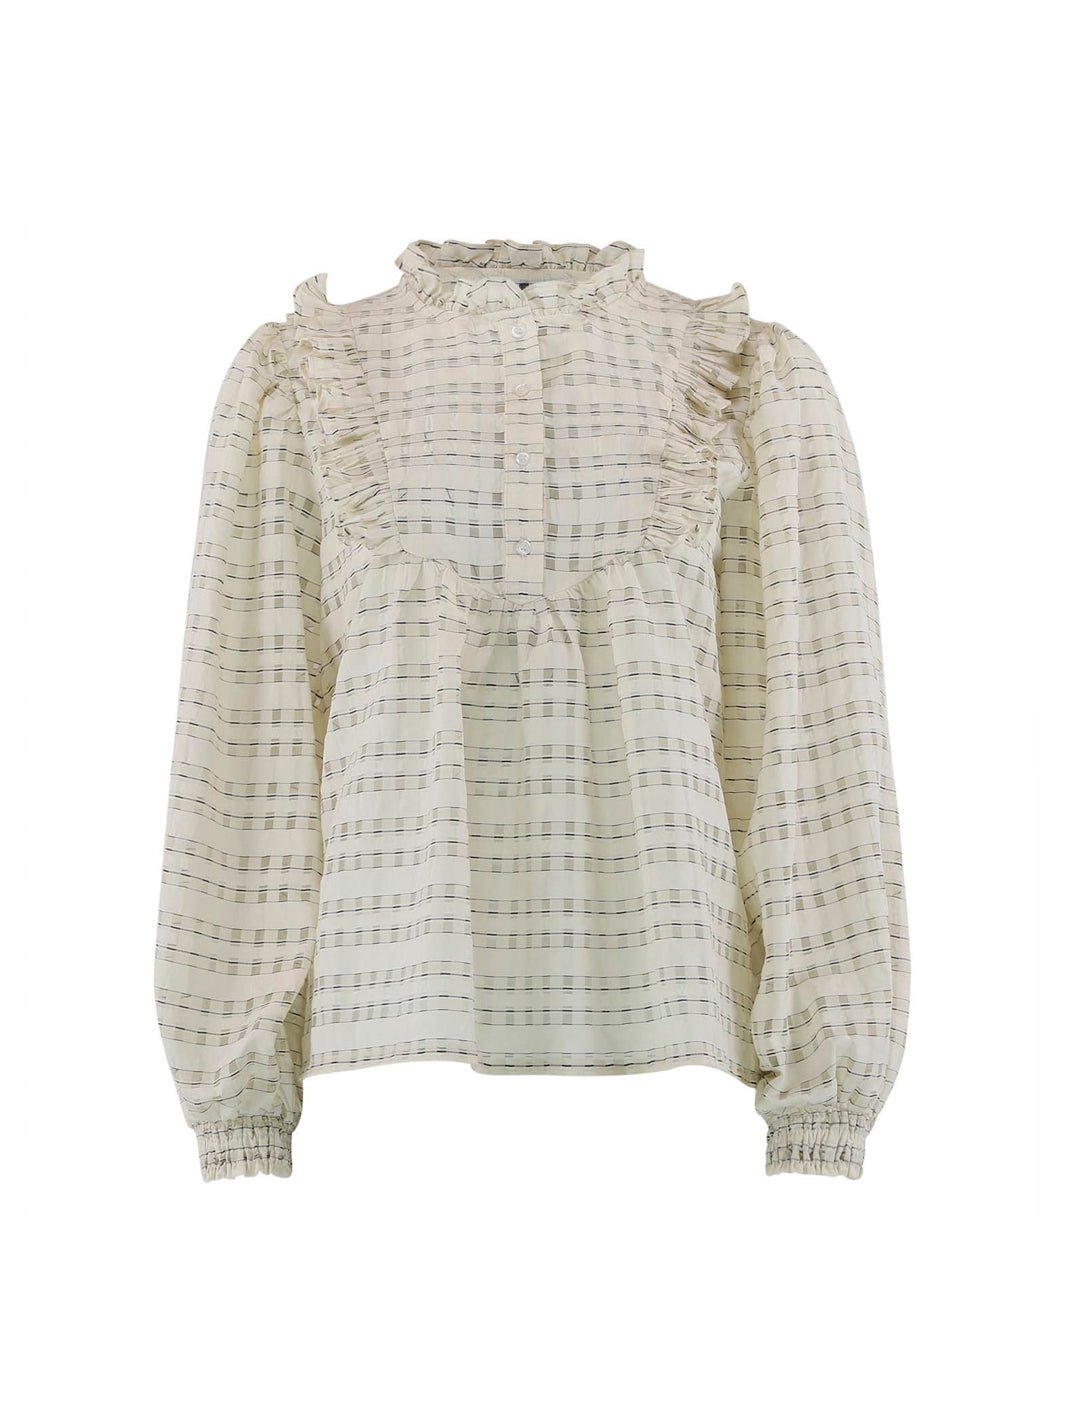 Continue Silke checked bluse off white - Online-Mode